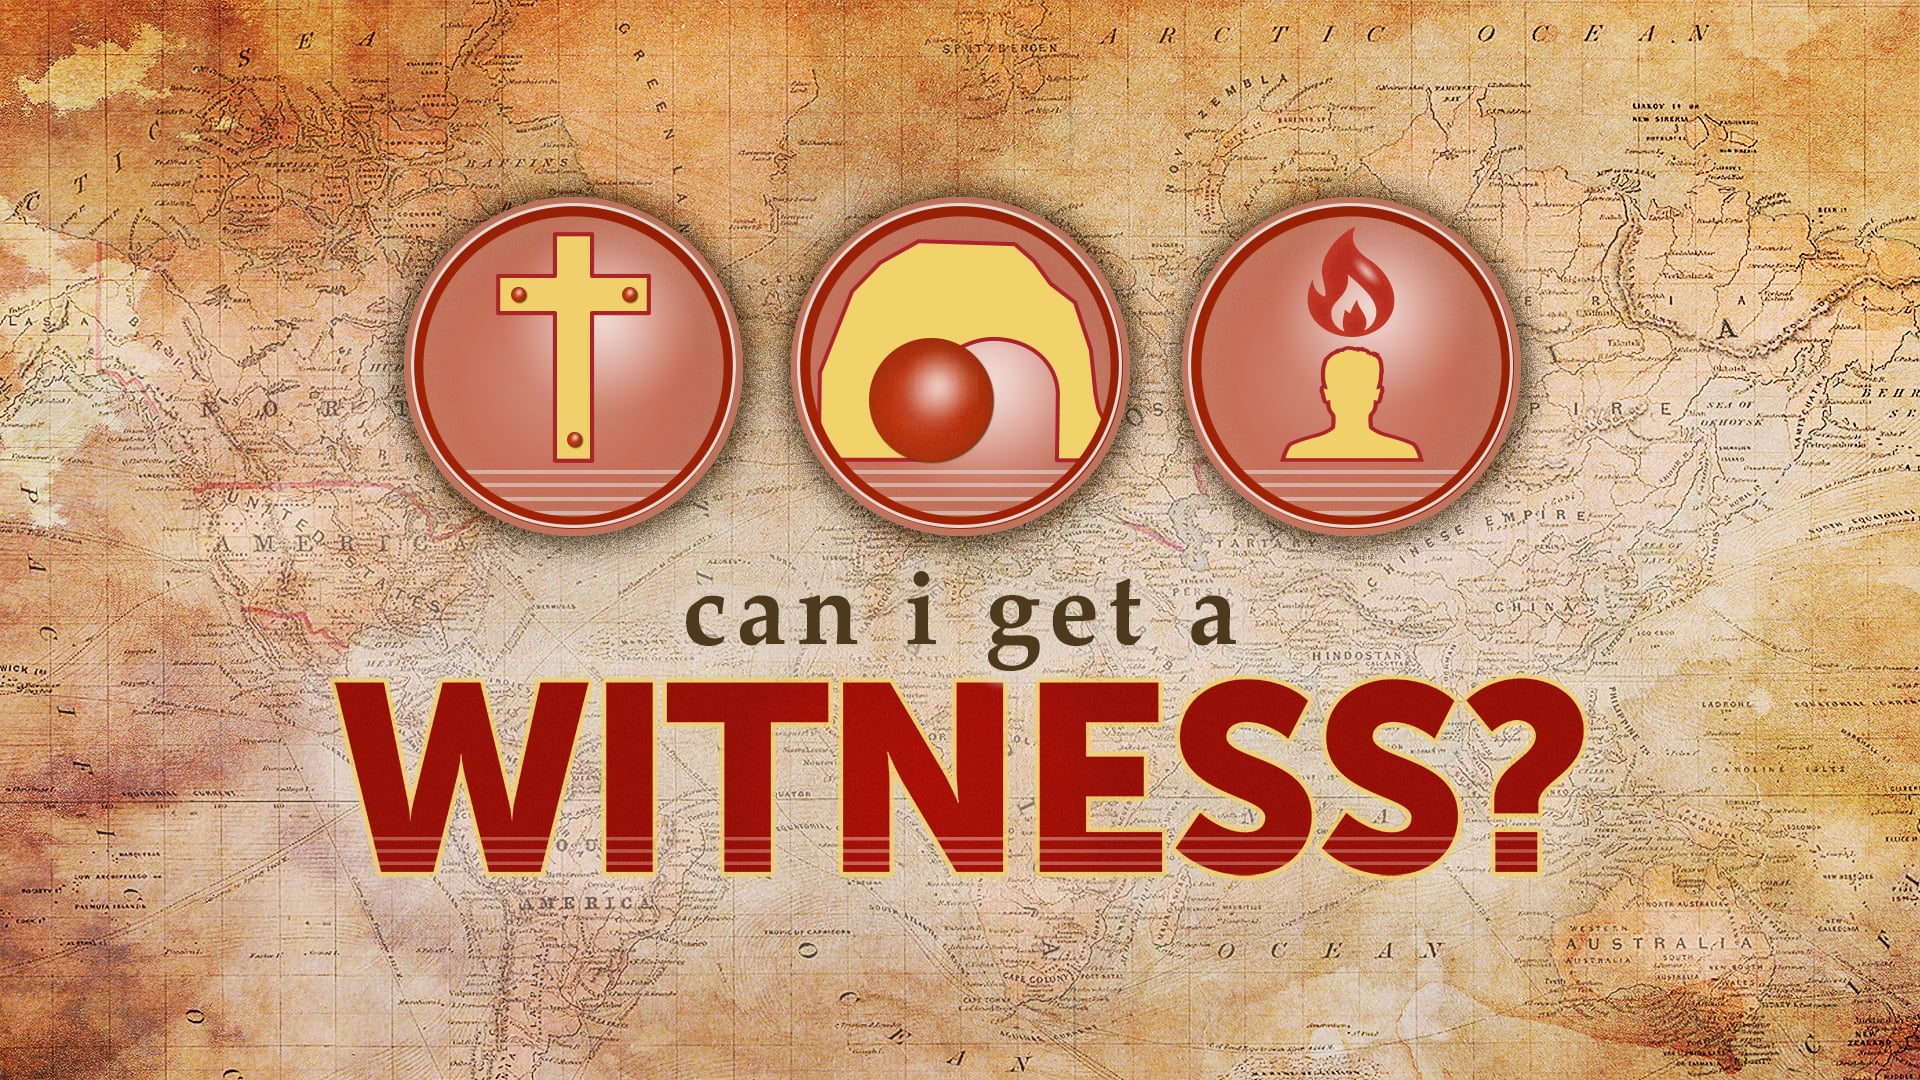 can-i-get-a-witness-part-2-6-11-23-traditional-message-on-vimeo